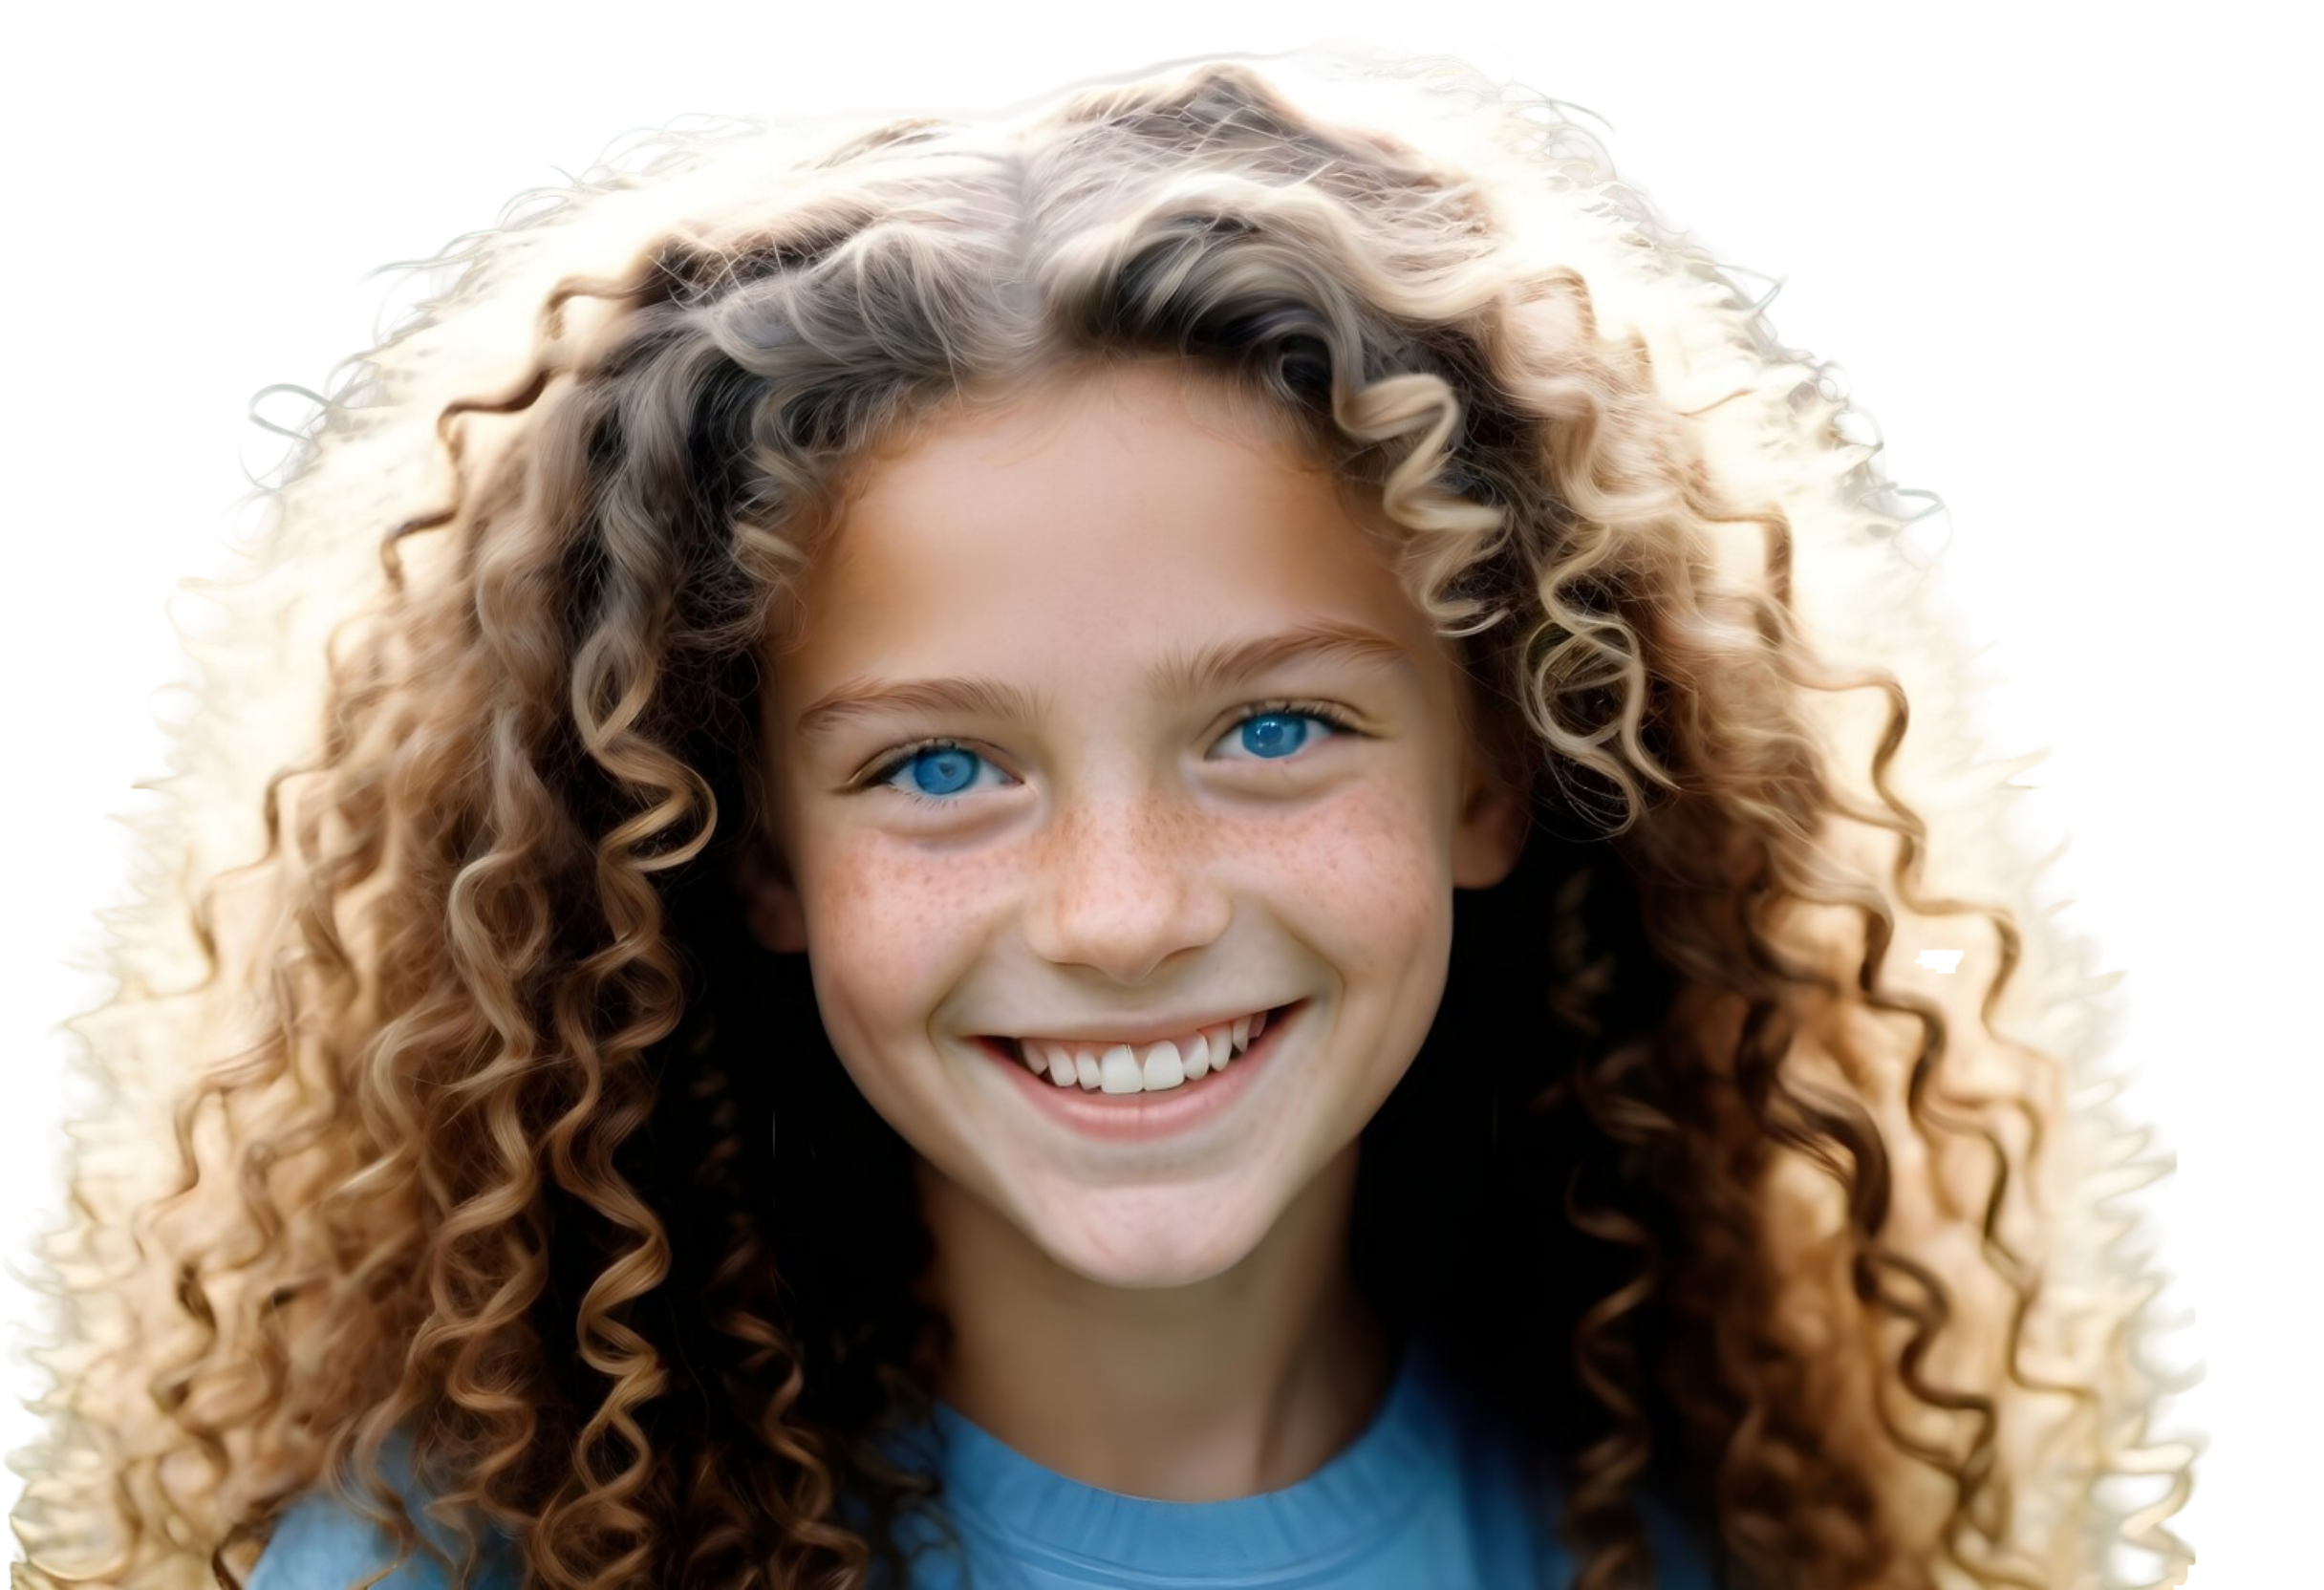 Free PNG Download: Girl with Curly Hair and Blue Eyes